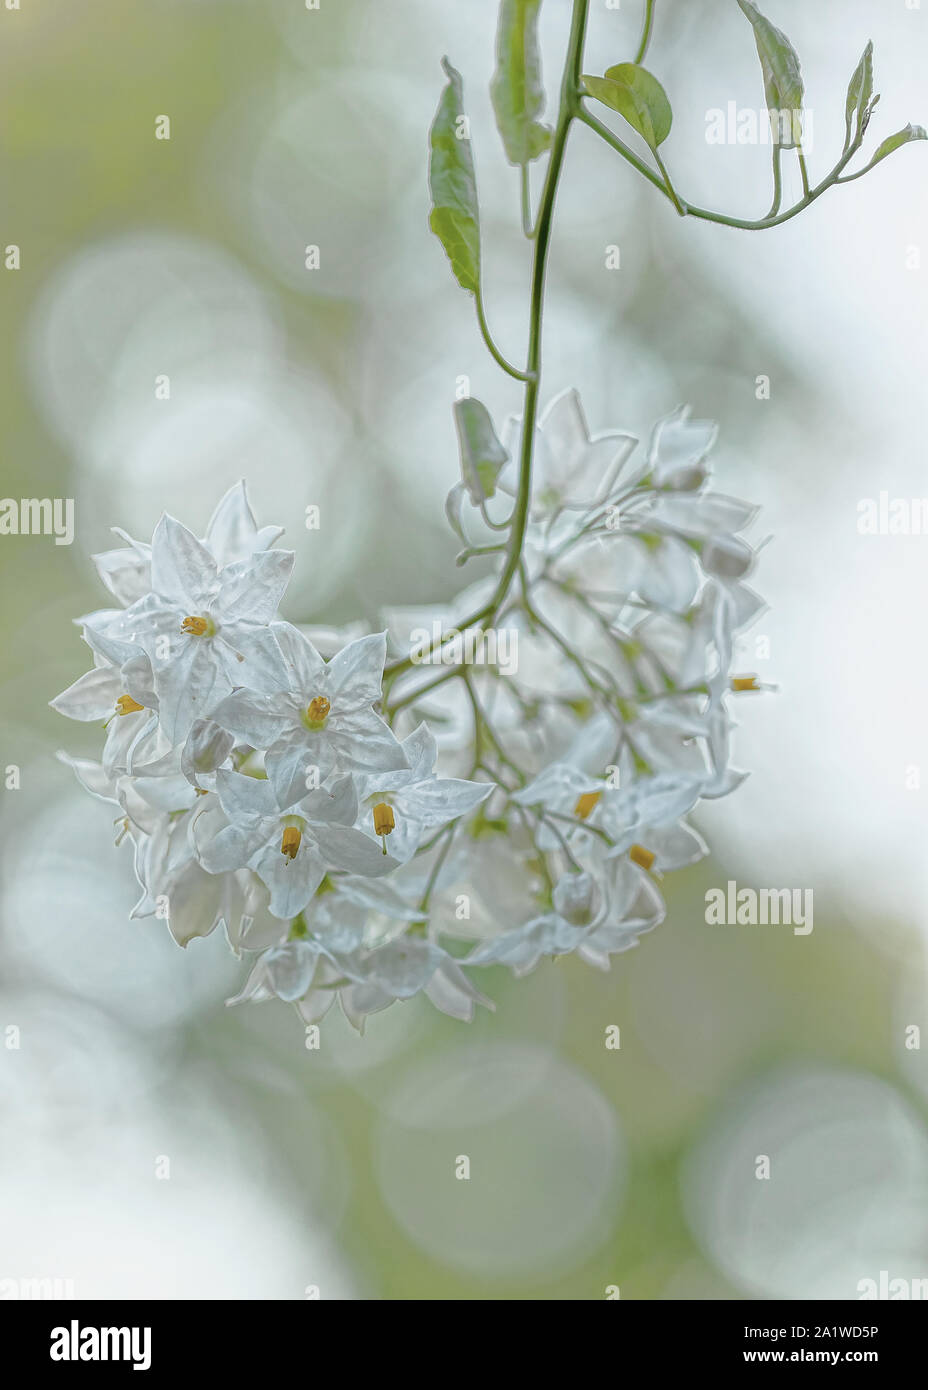 White Jasmine Bloom against a blurred background of more flowers. Stock Photo